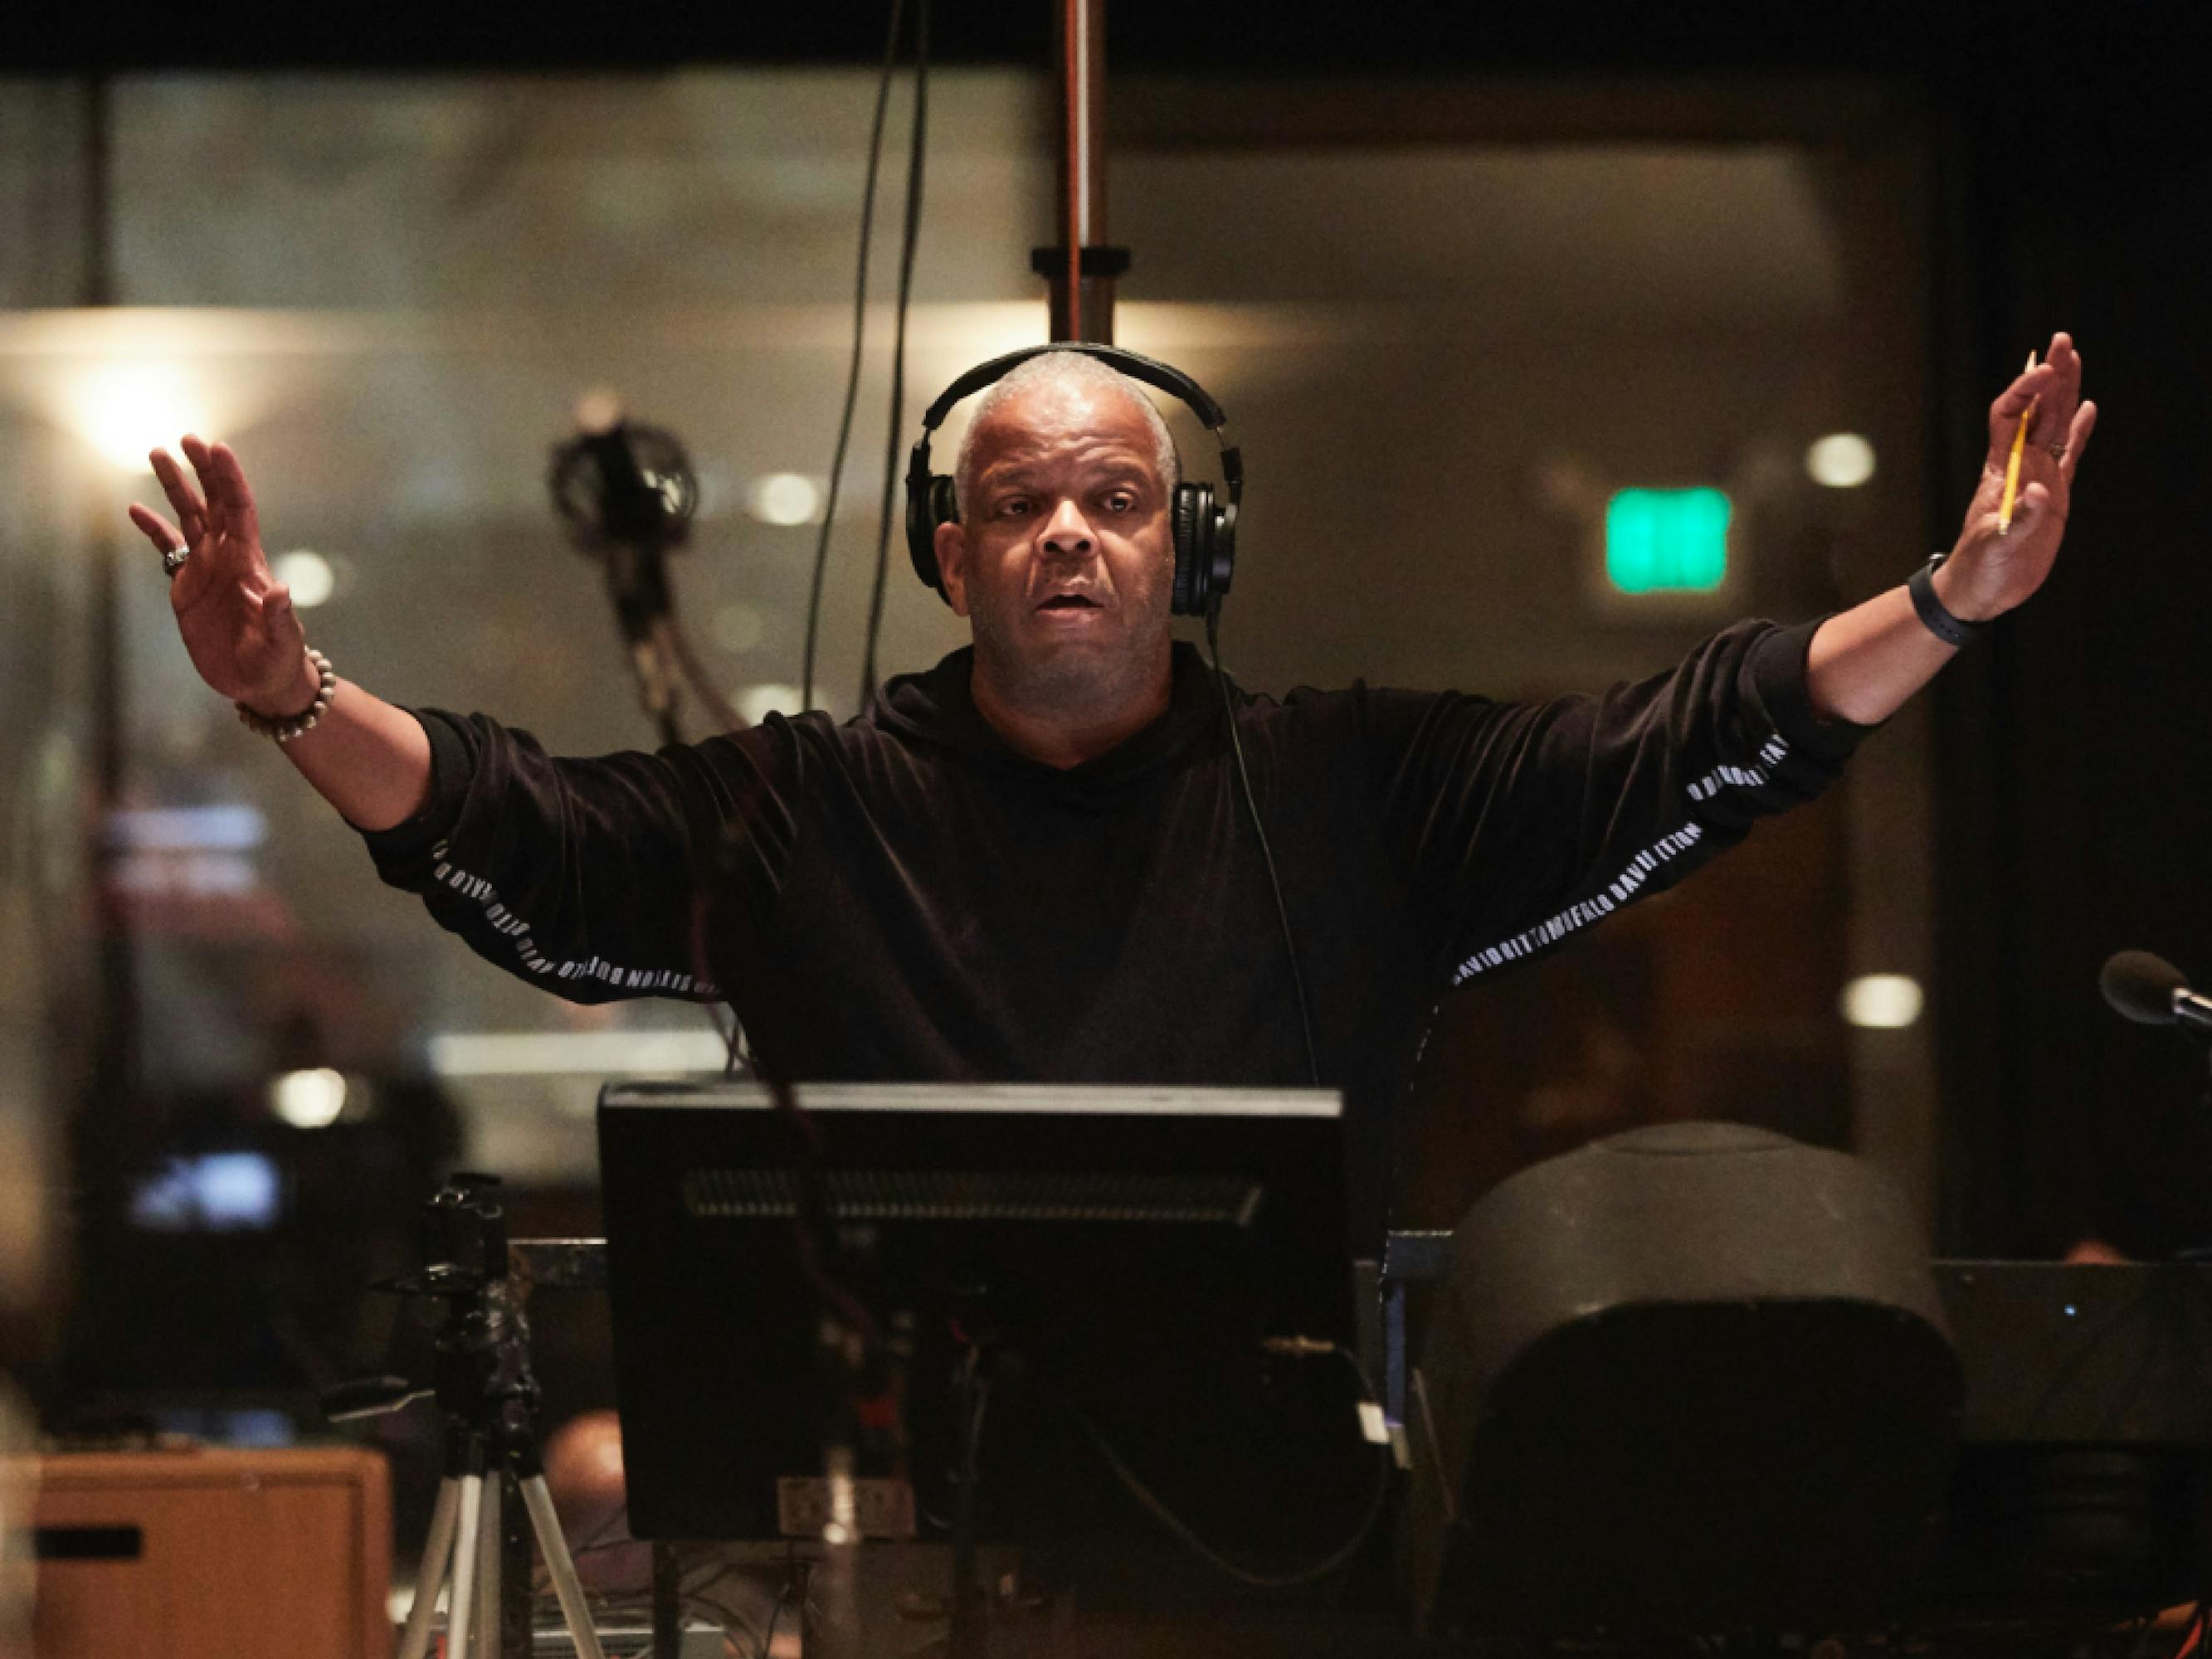 Composer Terence Blanchard is at his music stand with his arms raised up as he conducts. He has on large, over-the-ear headphones and a black hoodie.